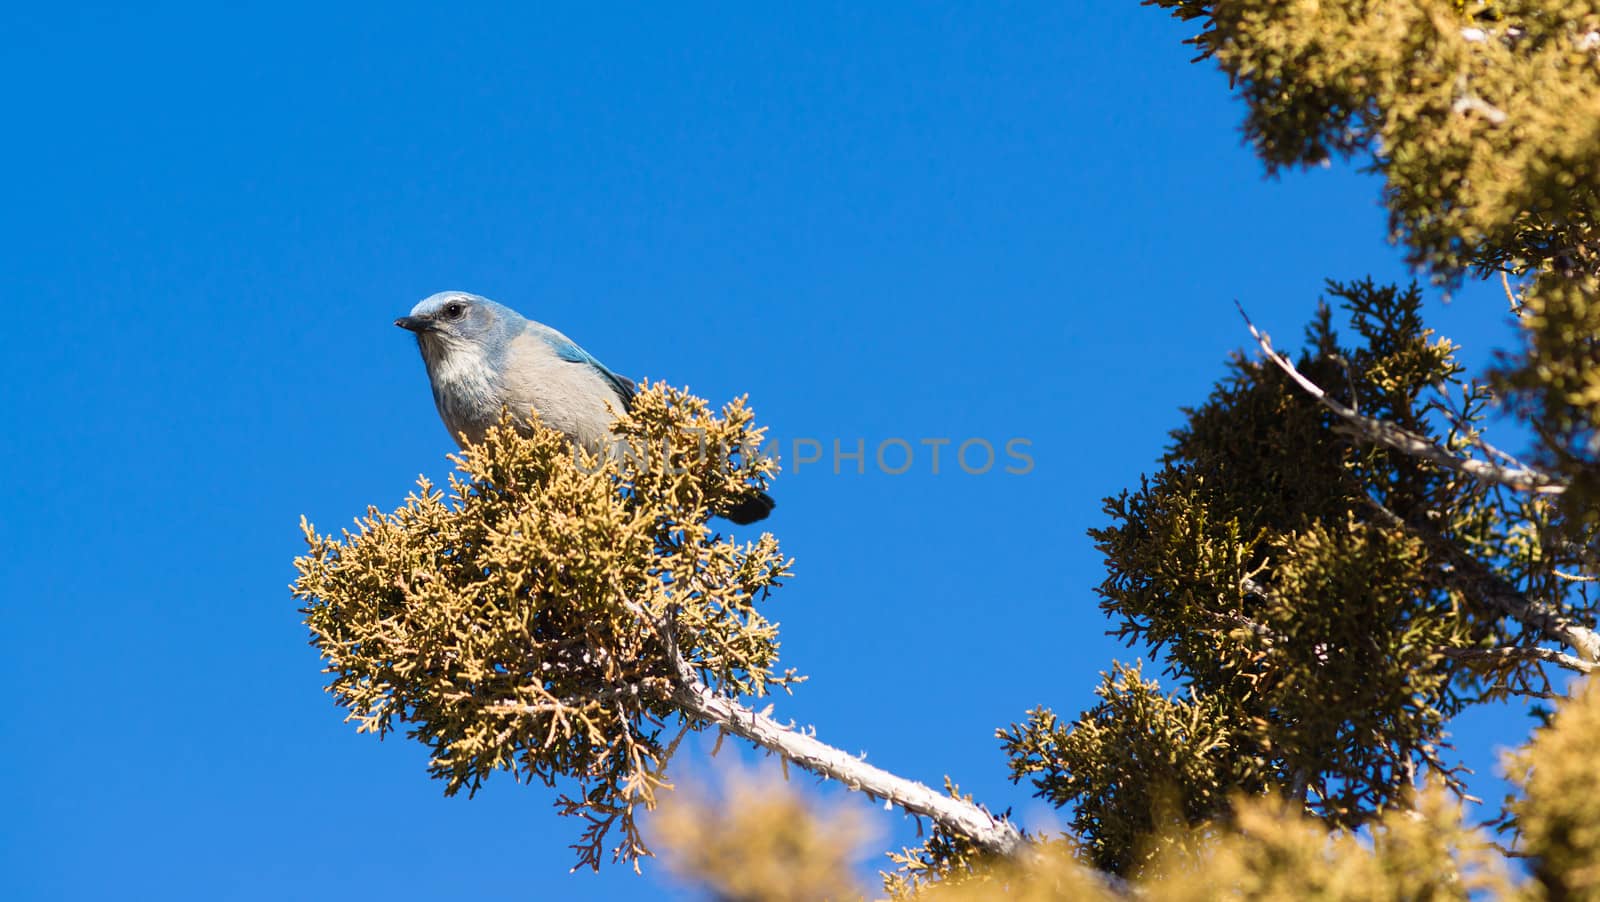 A blue wird hangs out in the picnic area looking for a handout